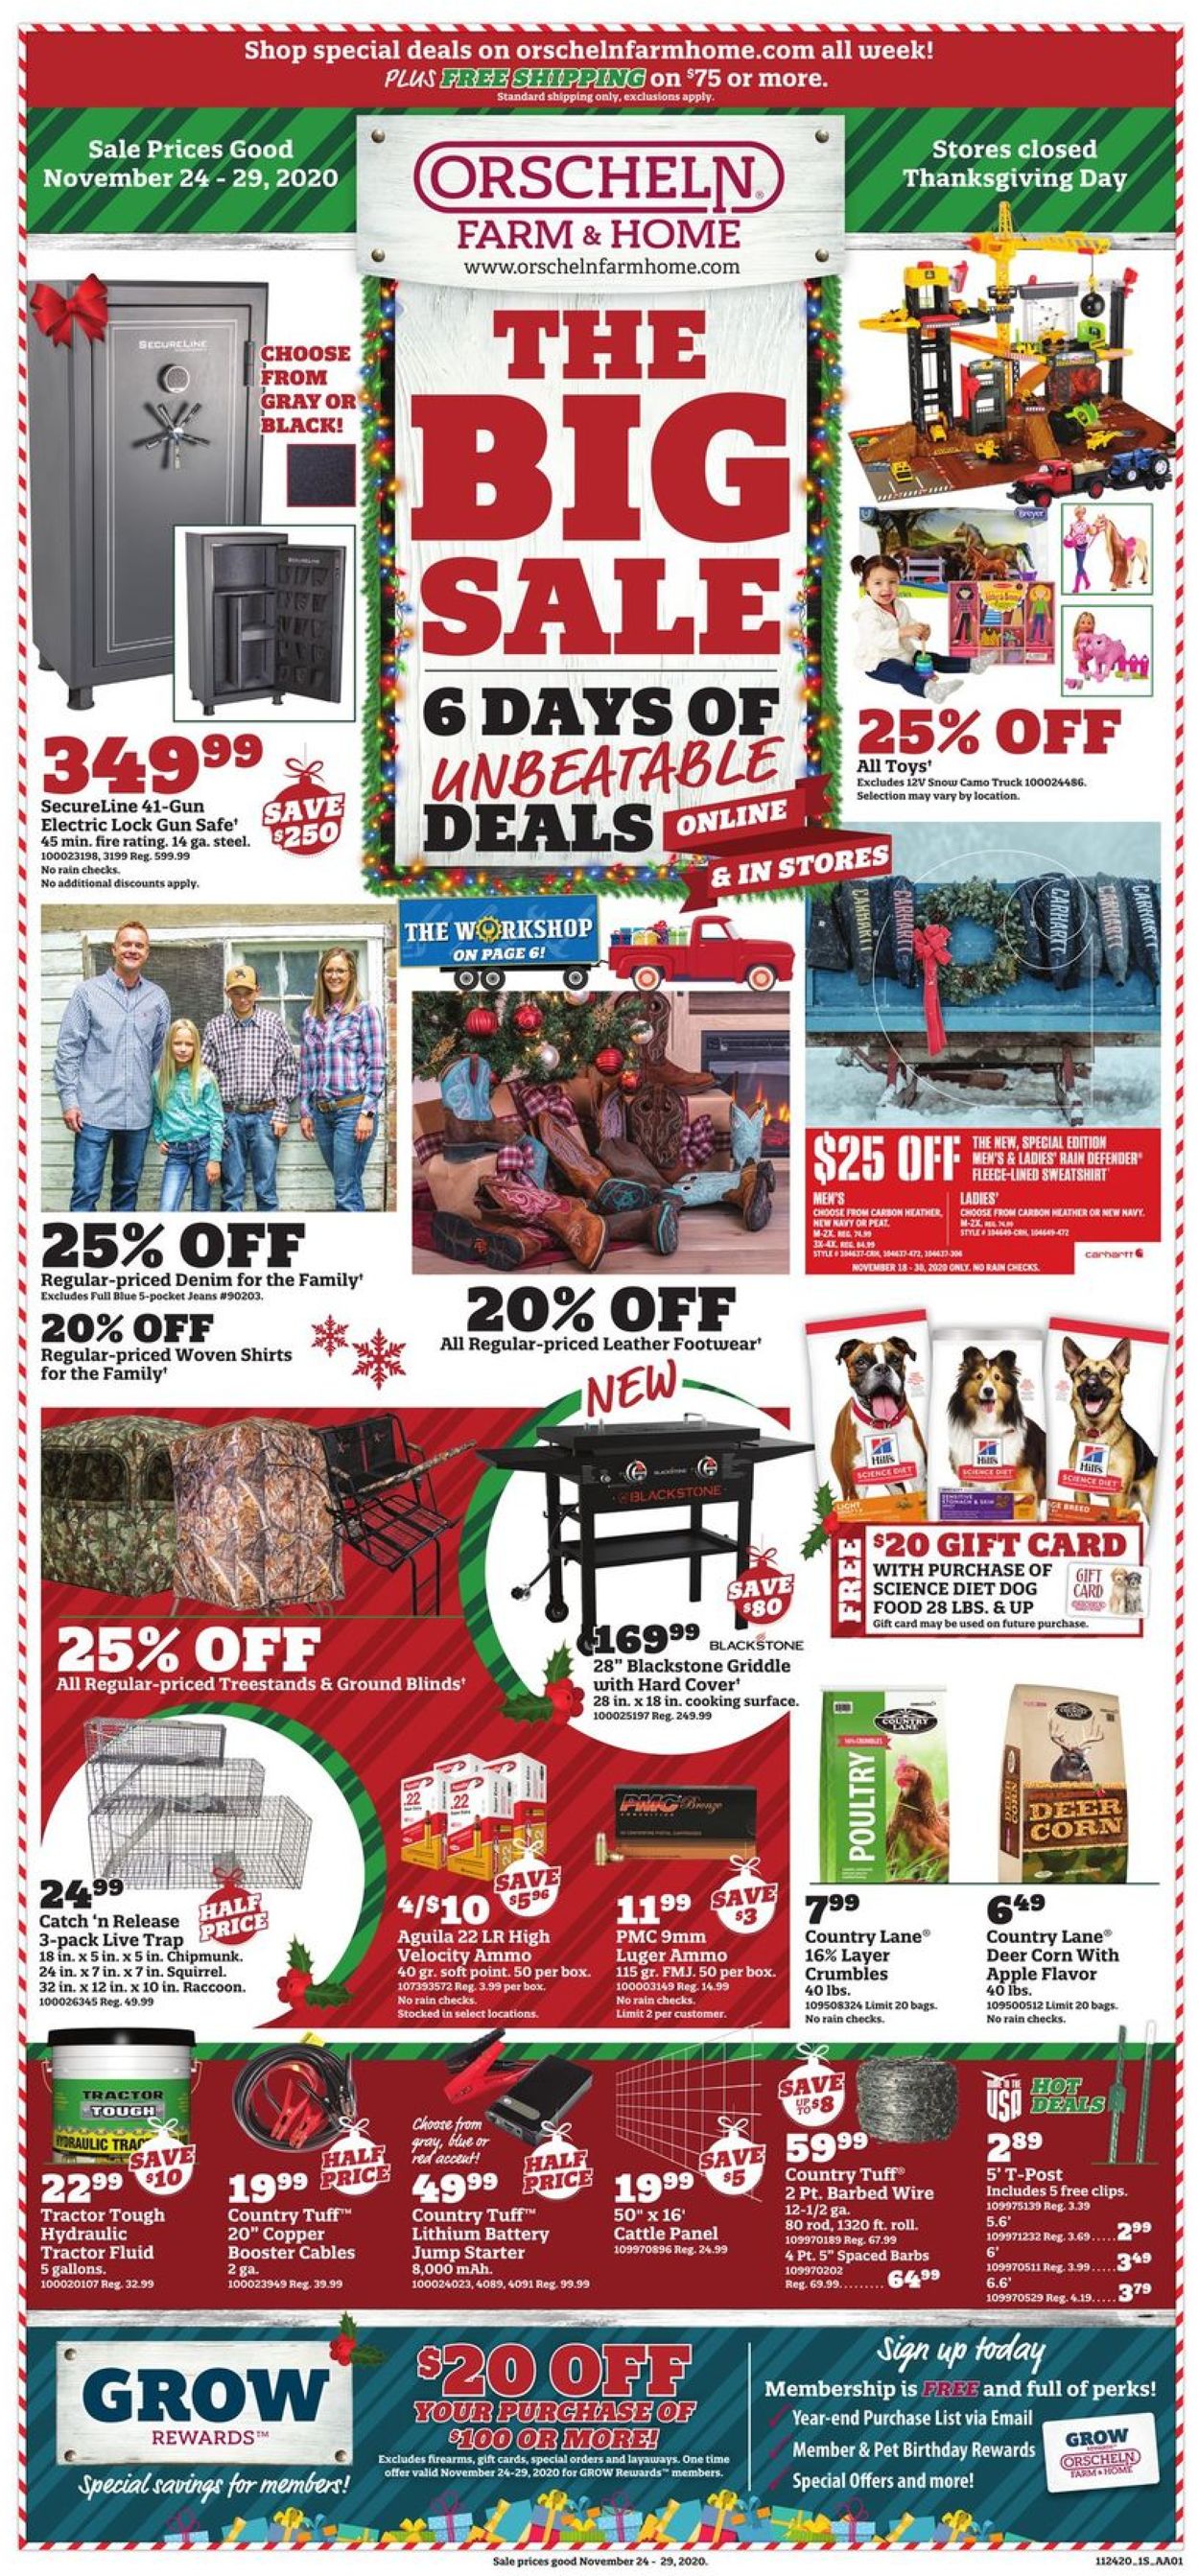 Orscheln Farm and Home - Black Friday Ad 2020 Weekly Ad Circular - valid 11/24-11/29/2020 (Page 2)